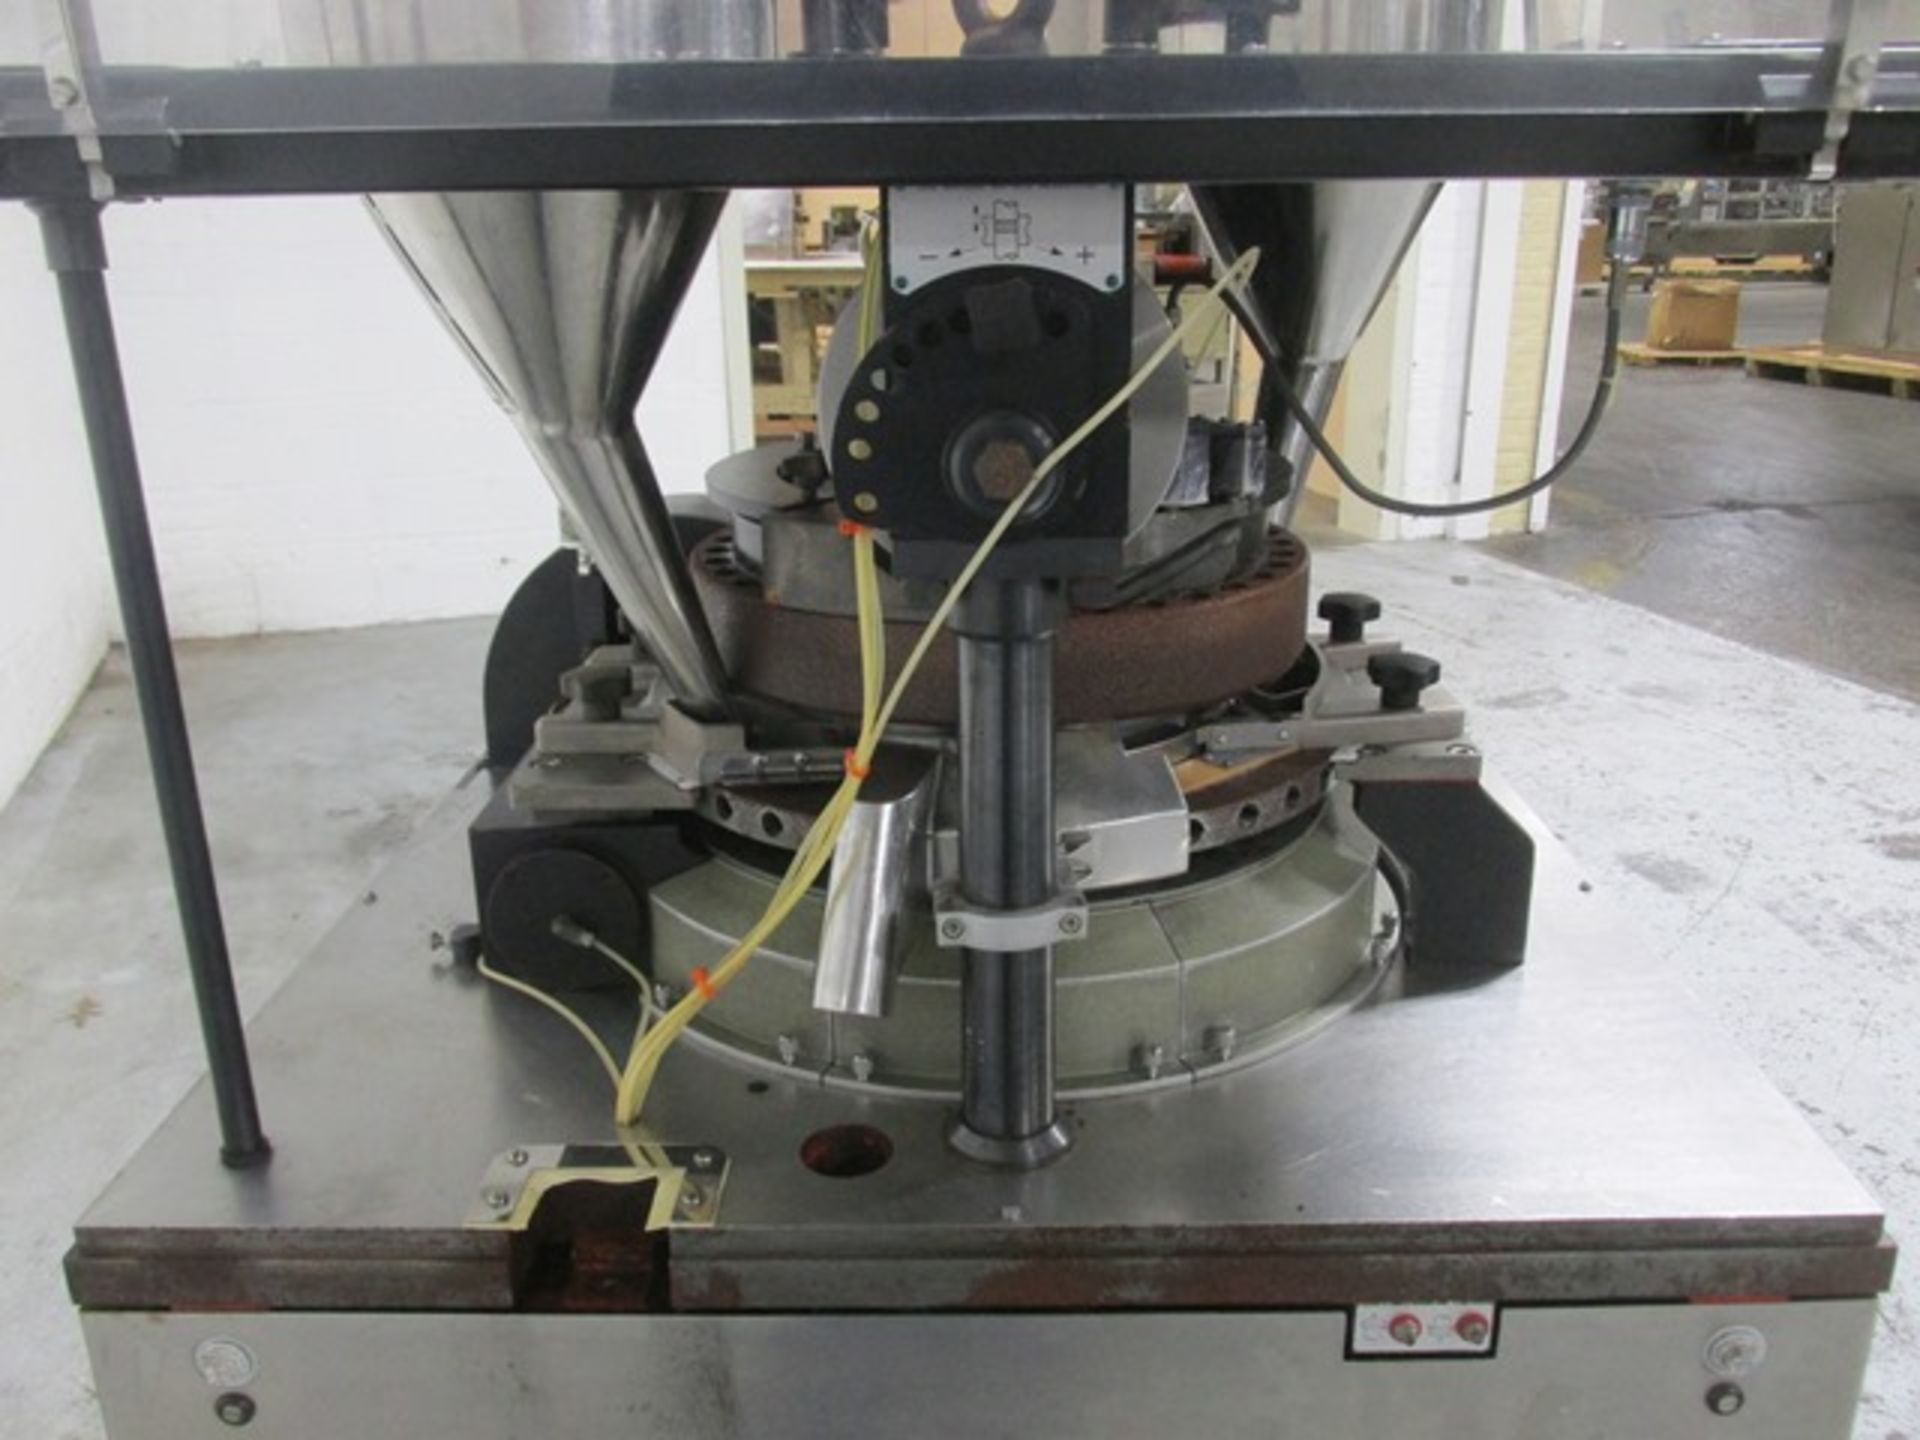 Manesty press rotary tablet press, model BB4, 35 station, 6.5 ton compression pressure, - Image 15 of 18